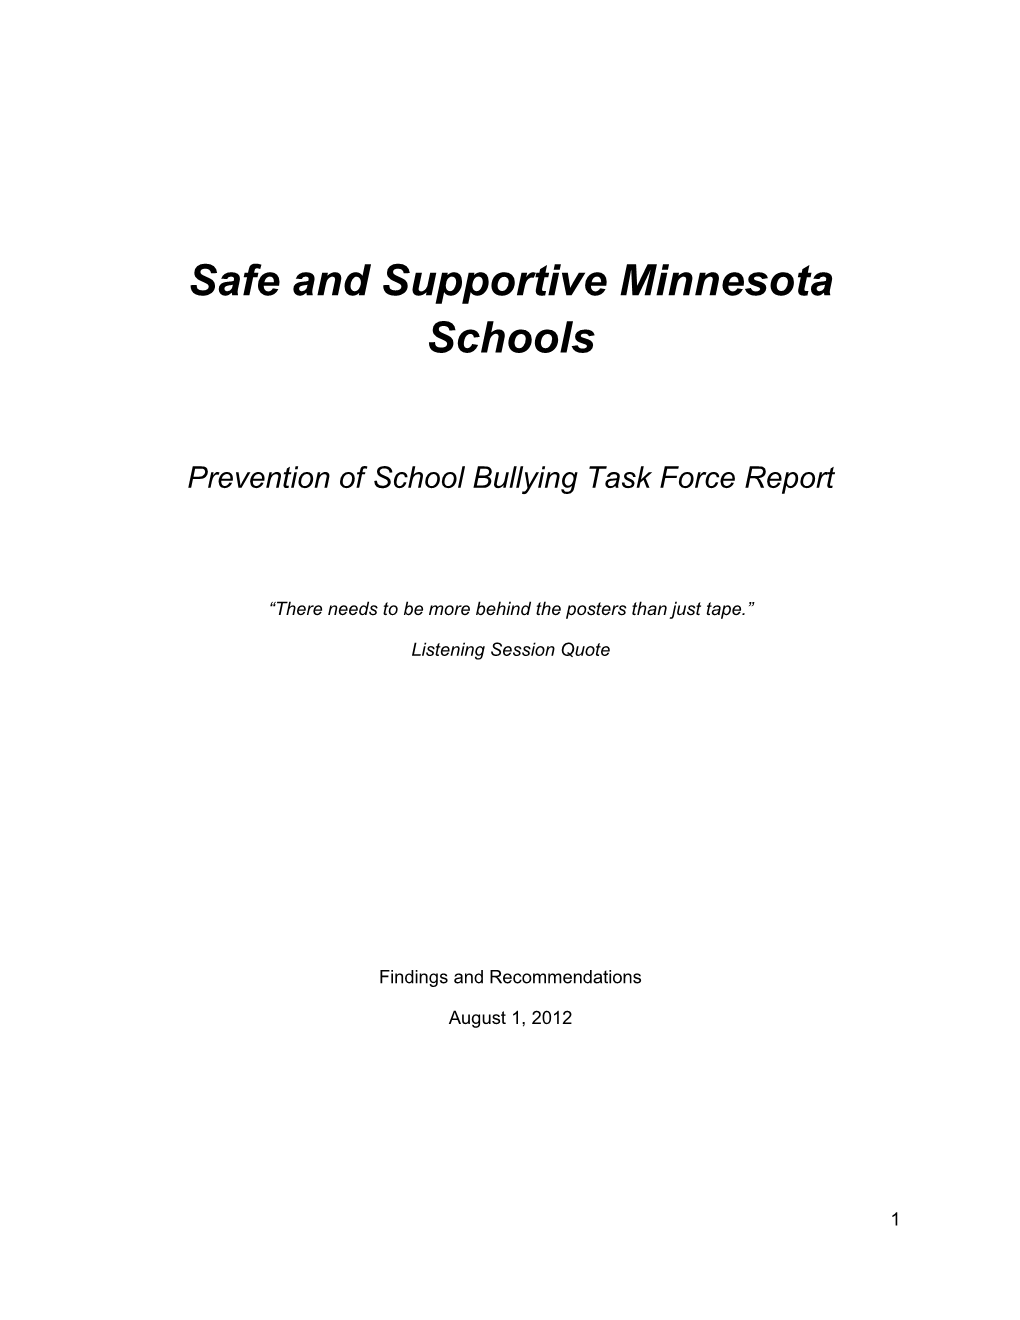 Prevention of Bullying Task Force Final Report